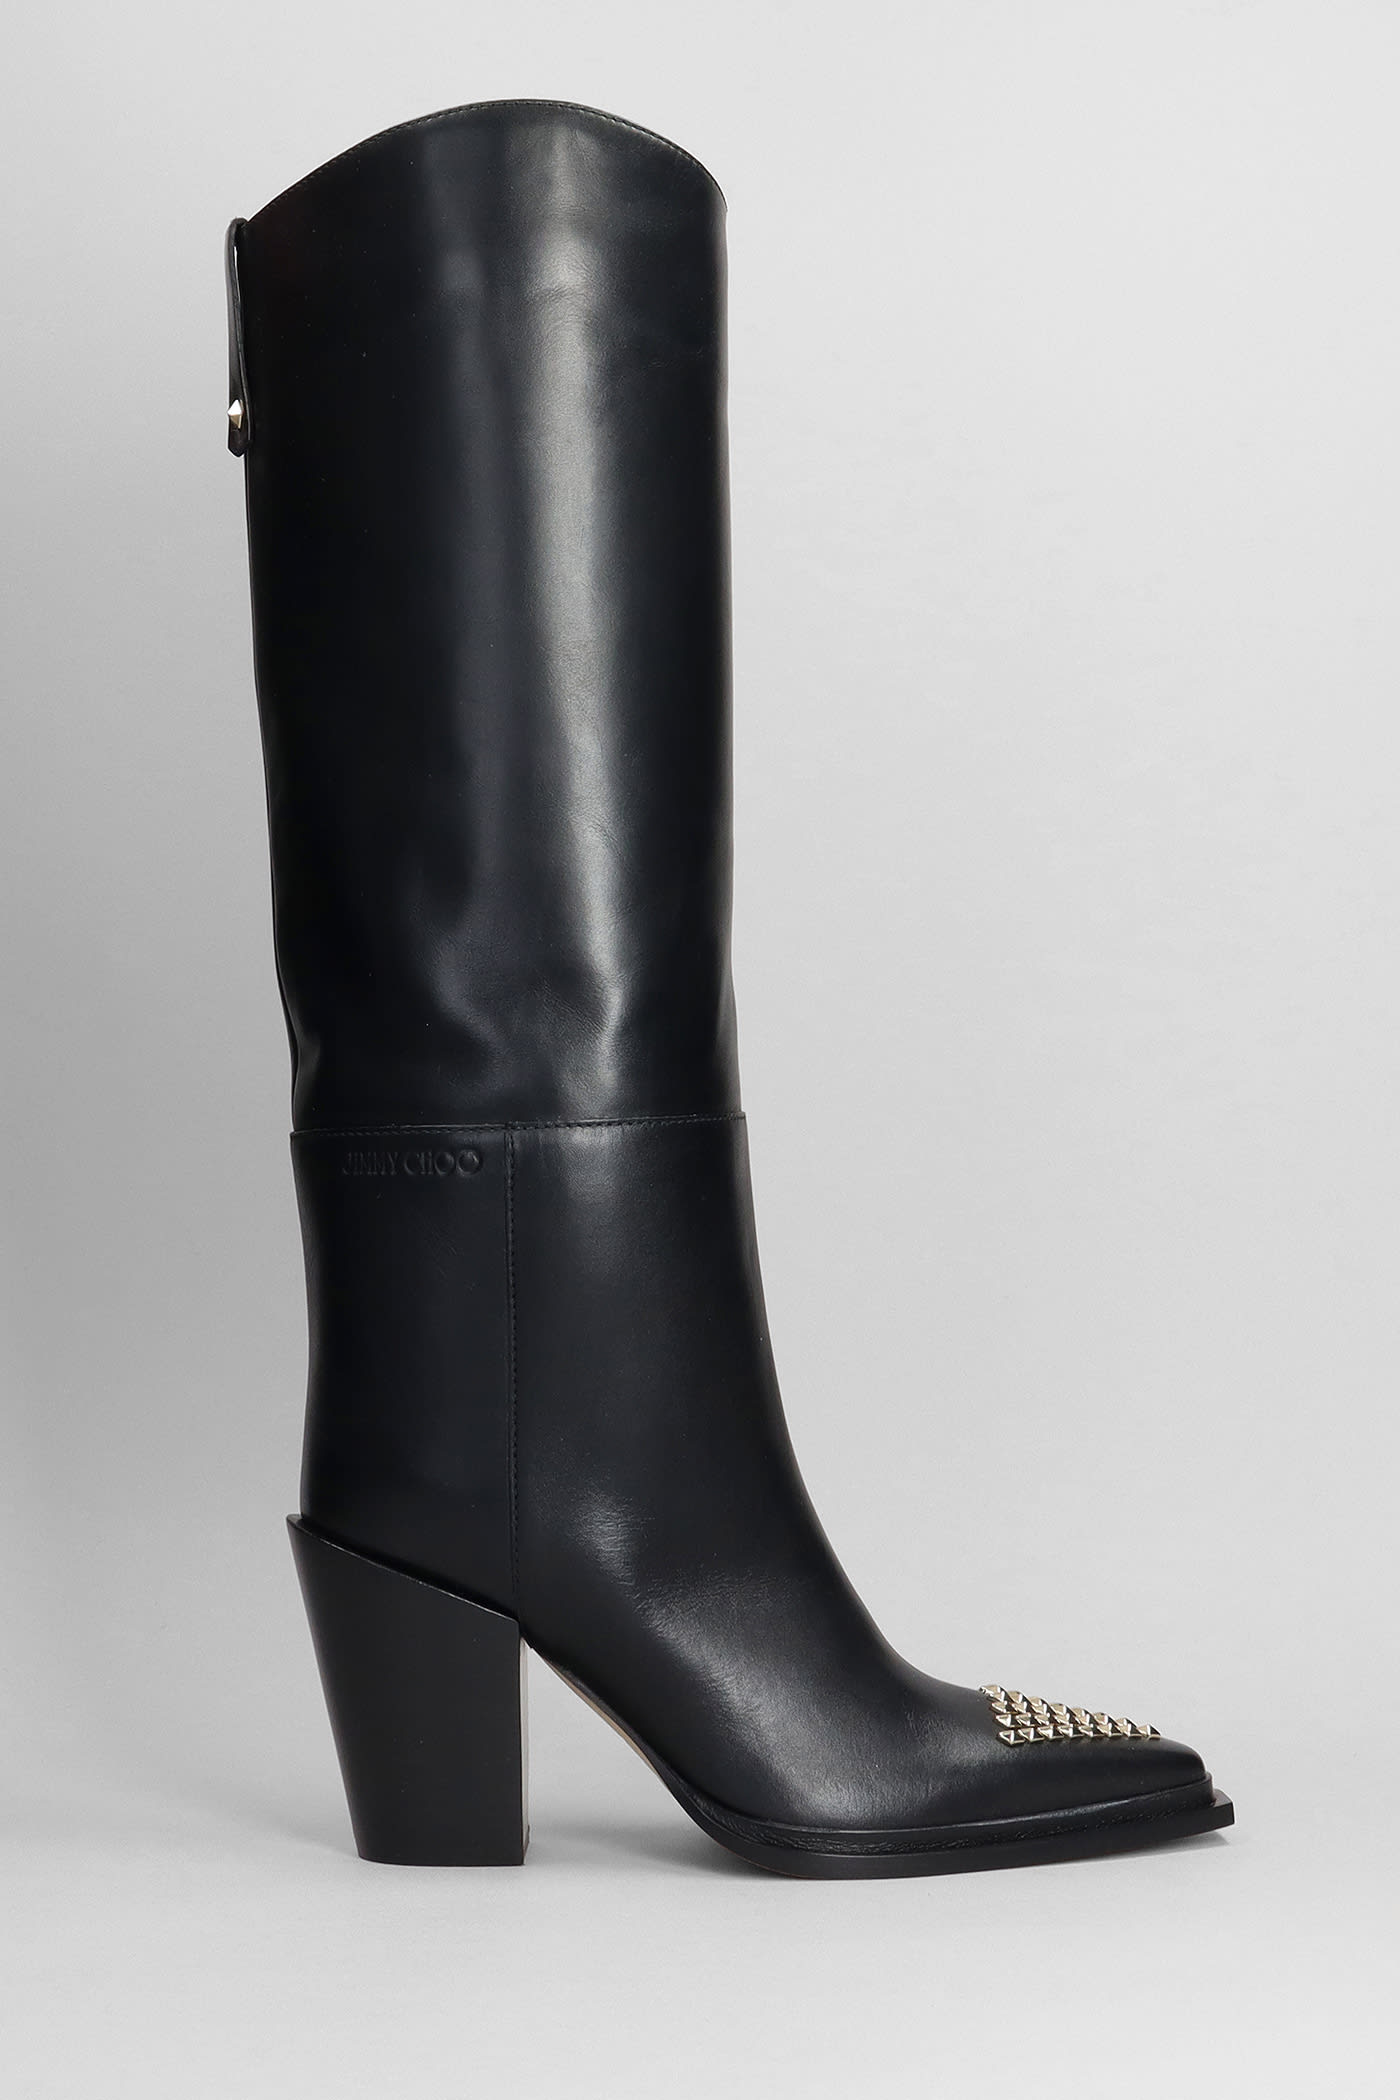 JIMMY CHOO CECE HIGH HEELS BOOTS IN BLACK LEATHER